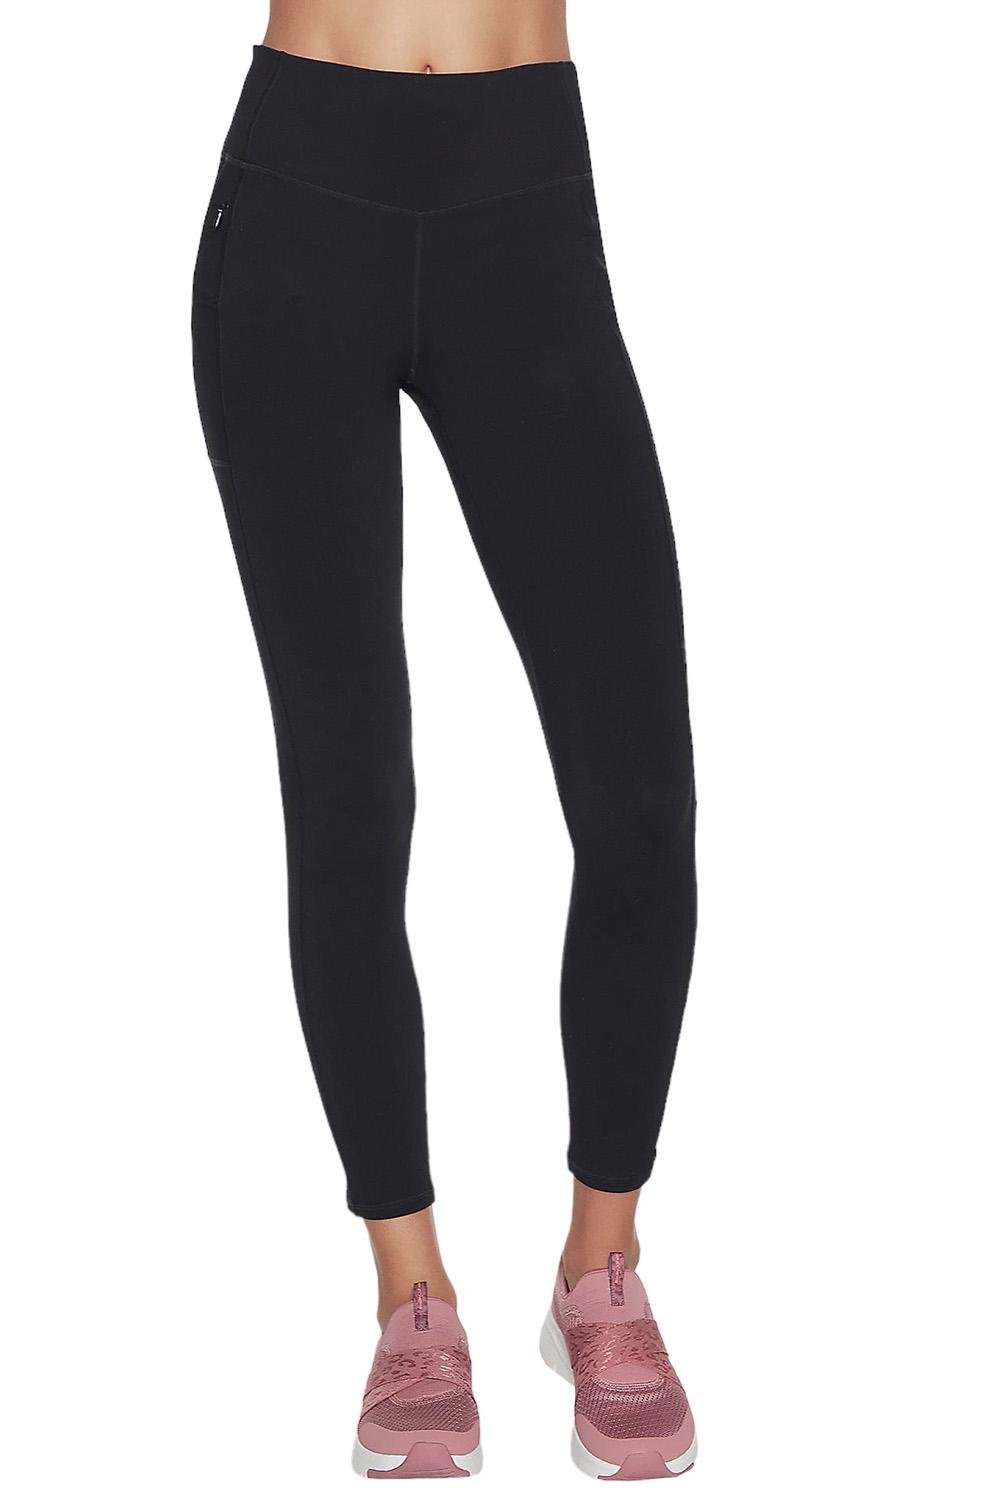 LOGO Layers by Lori Goldstein Knit Pull-On Ankle Leggings 